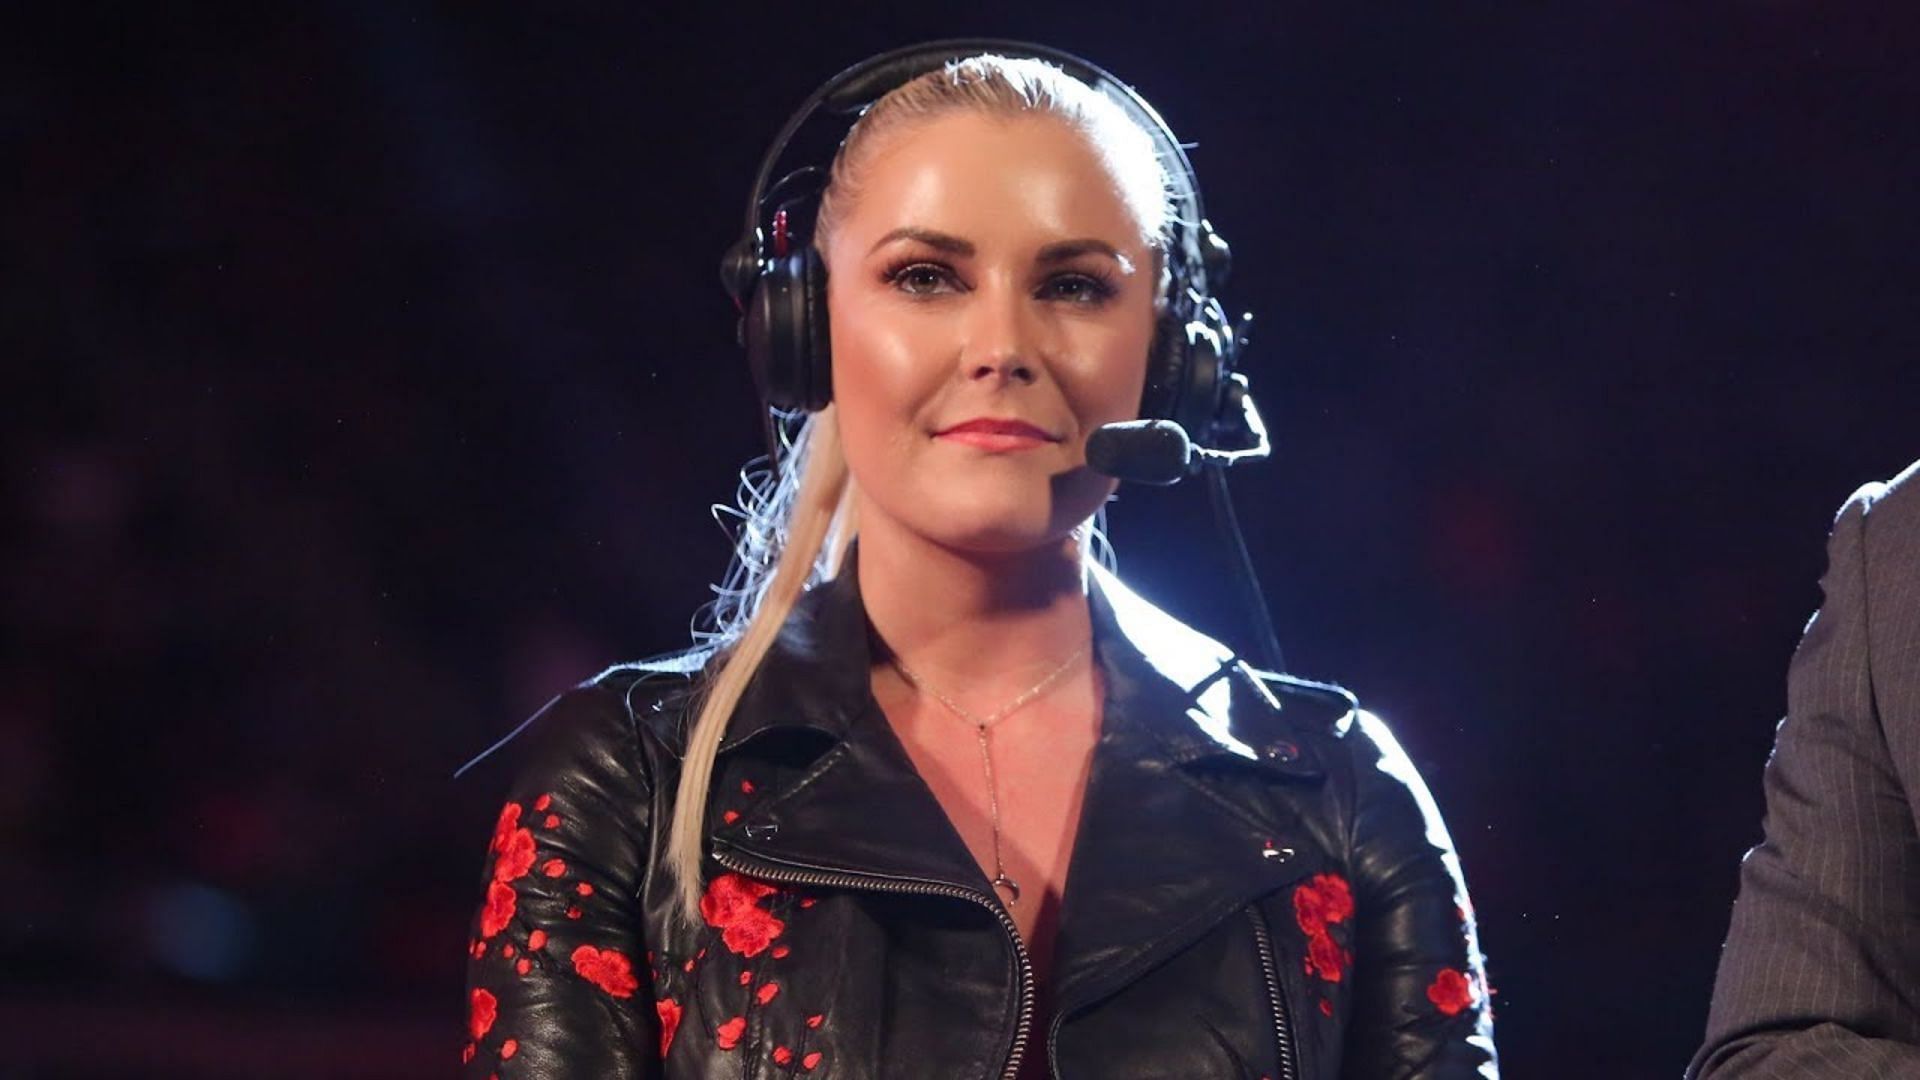 Renee Paquette was the first woman to work full-time as a WWE commentator.